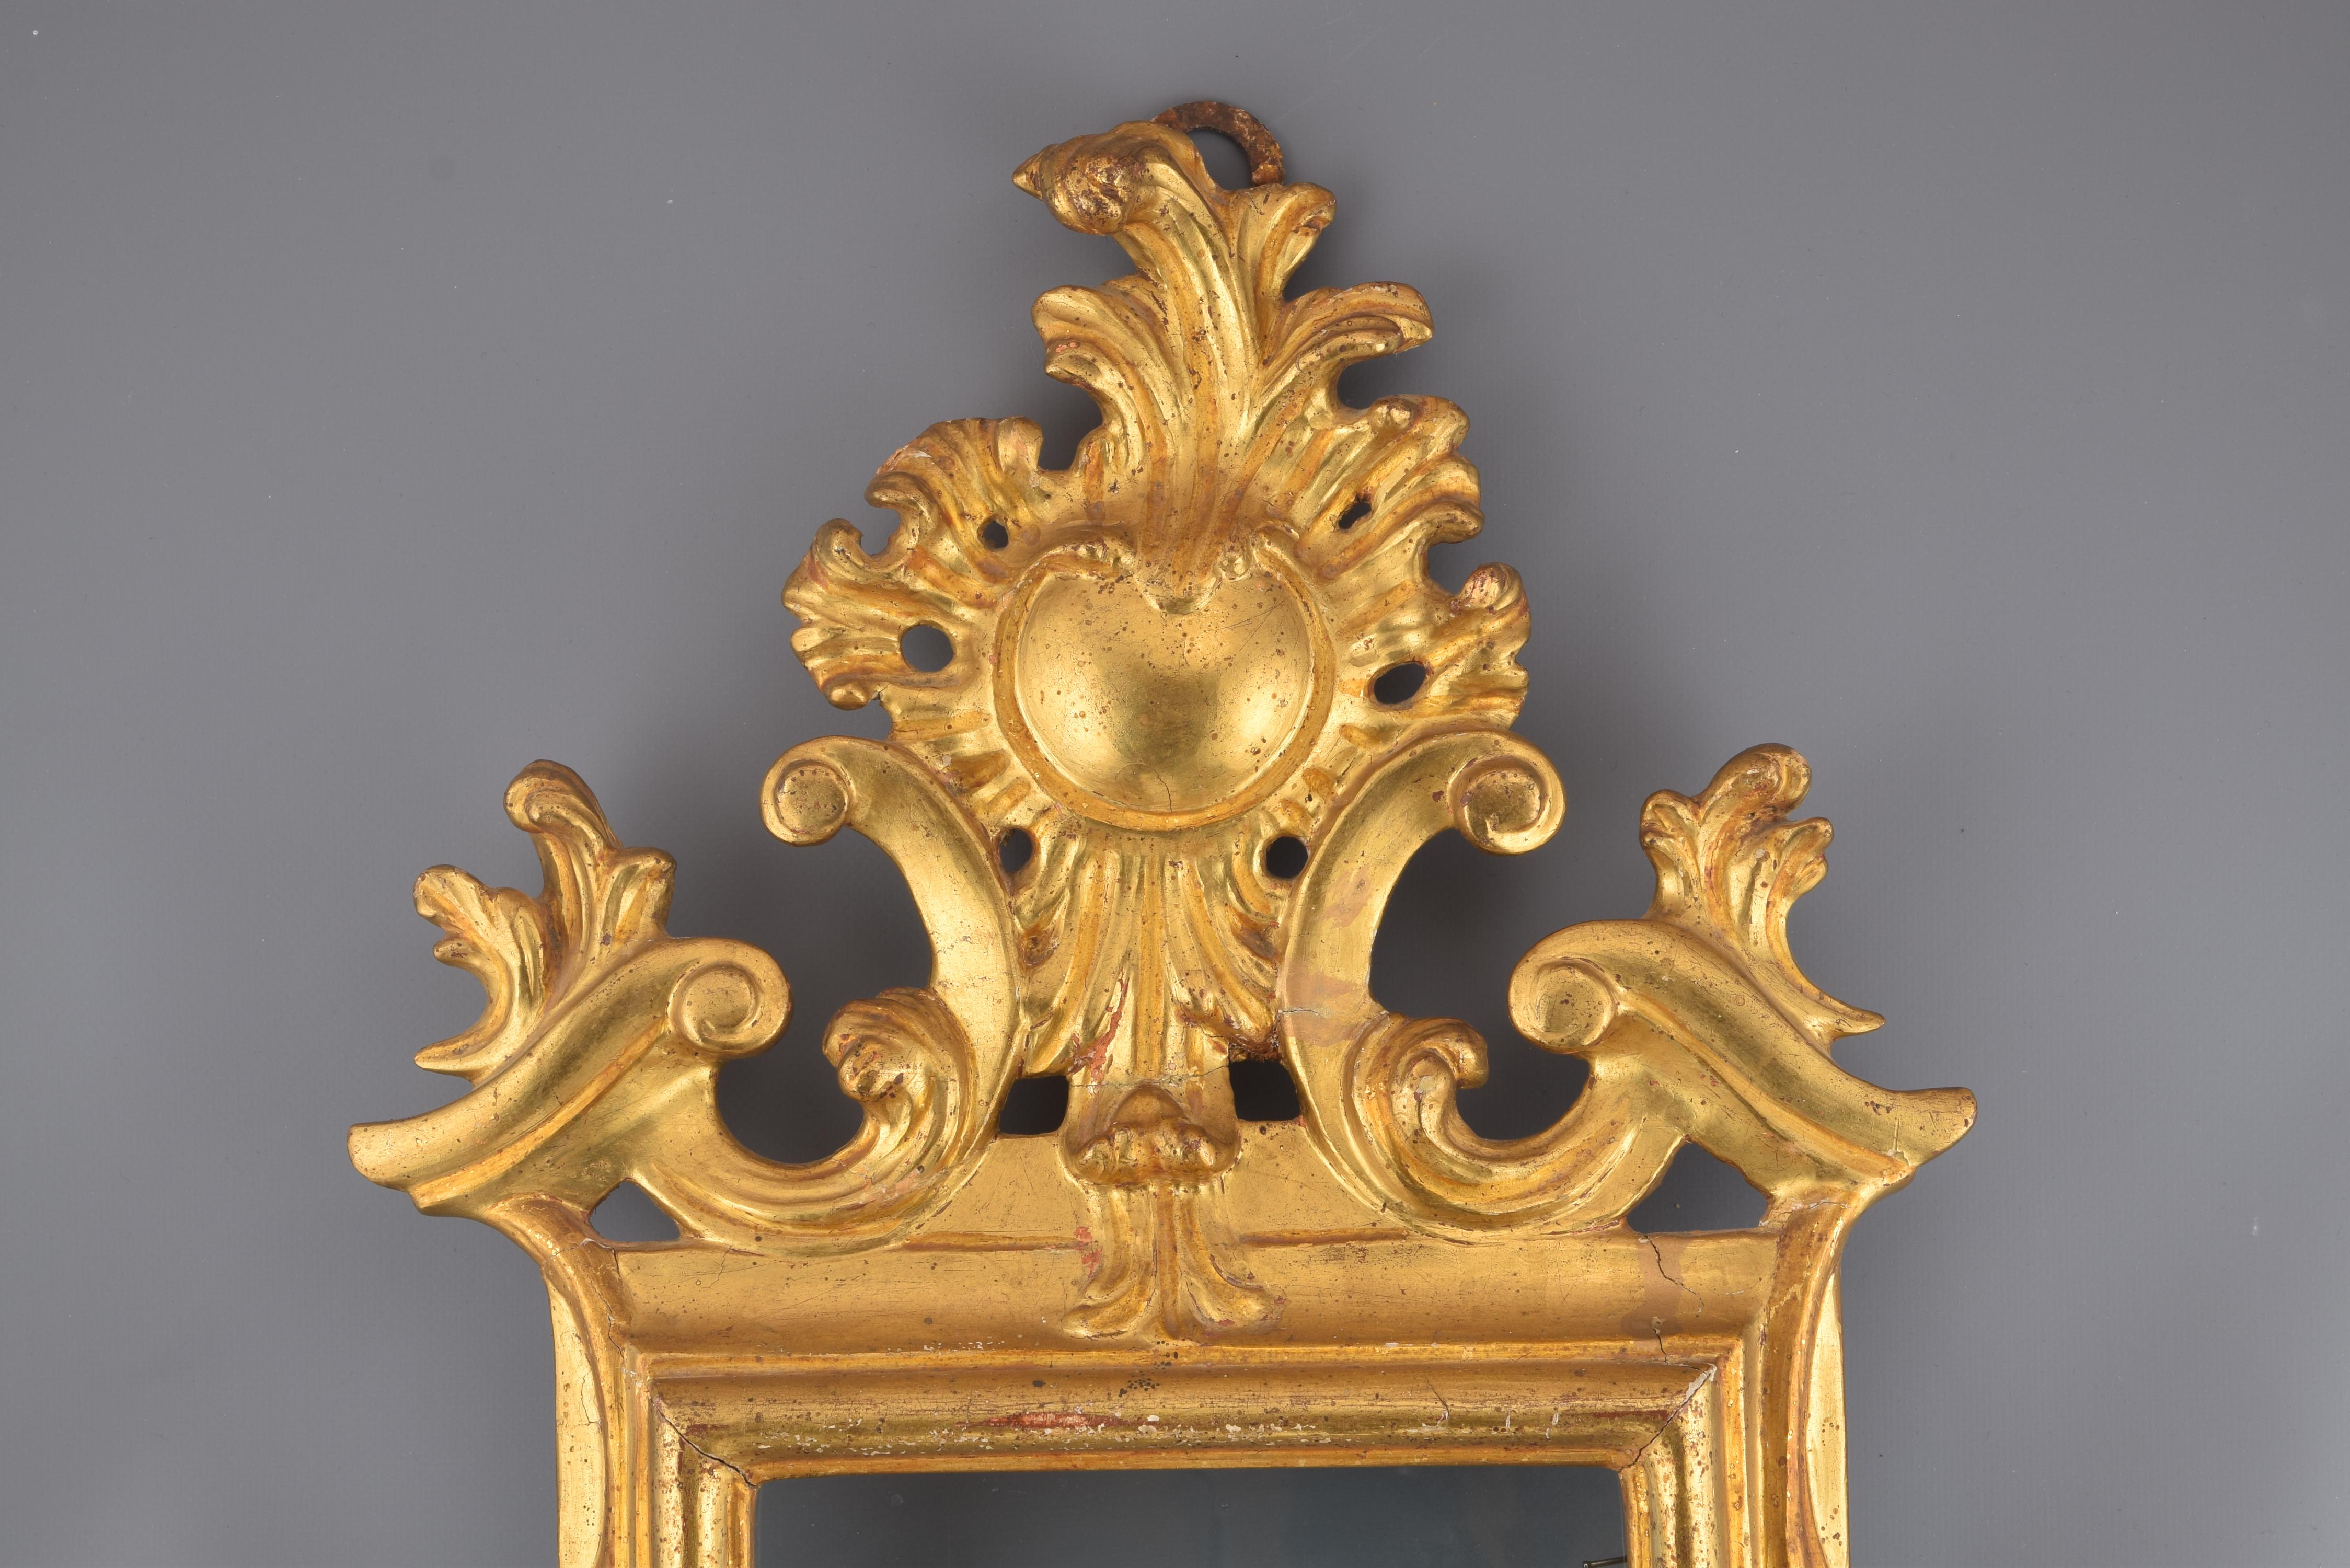 It requires restoration.
Rectangular cornucopia with carved and gilded wooden frame decorated with a series of smooth moldings and with a very elaborate finish on the upper part (arranged in symmetrical composition, architectural and vegetal